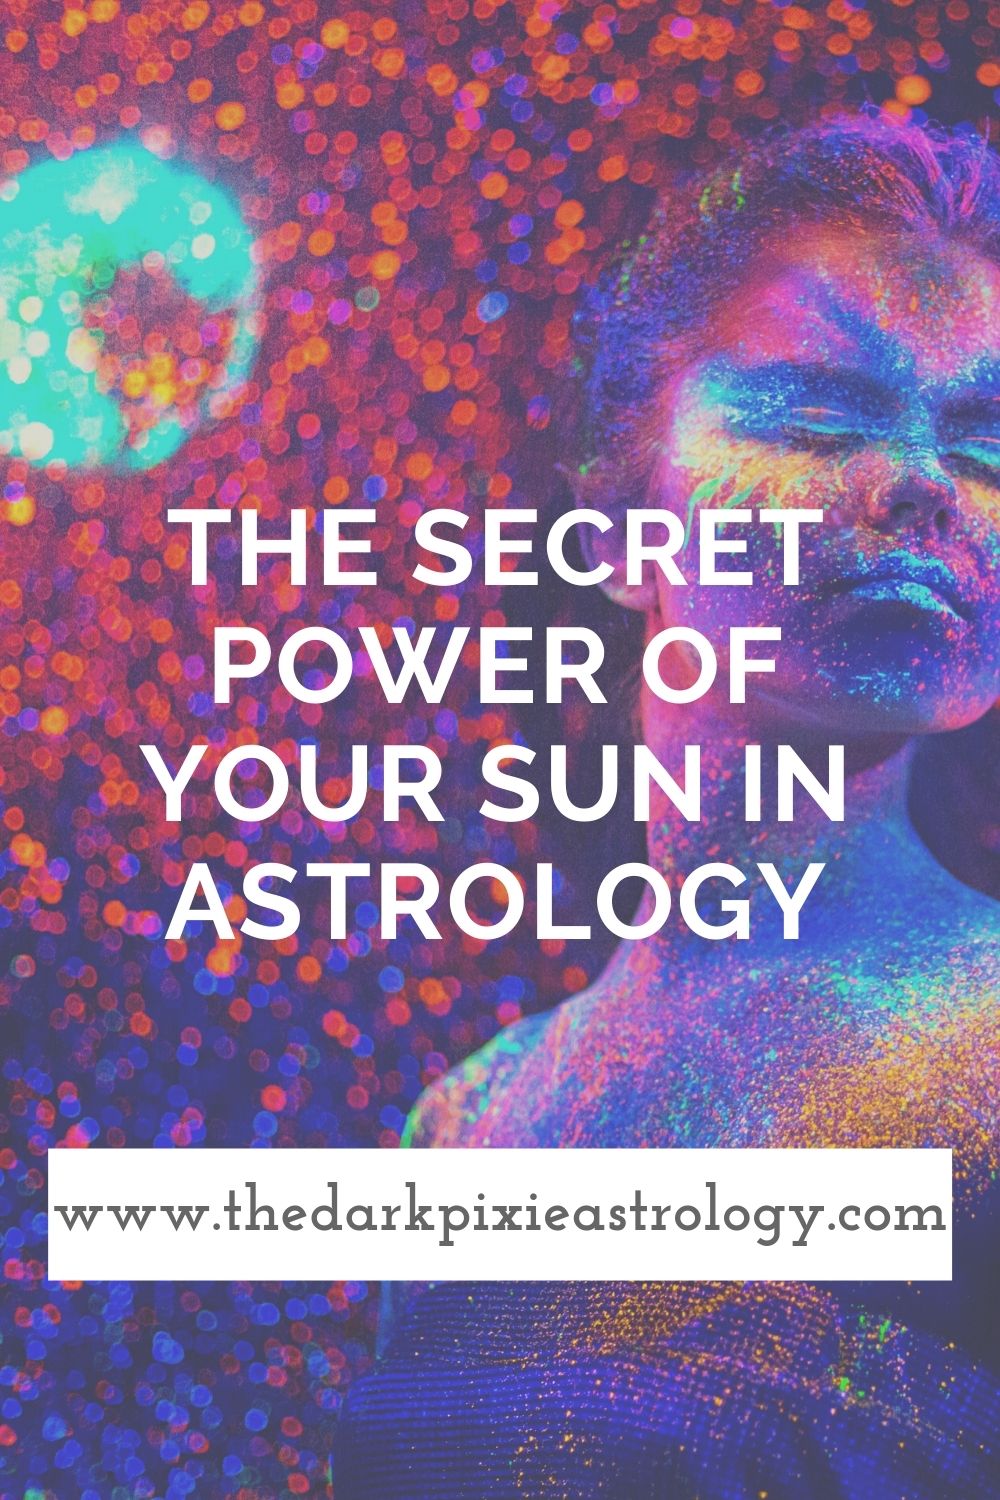 The Secret Power of Your Sun in Astrology - The Dark Pixie Astrology